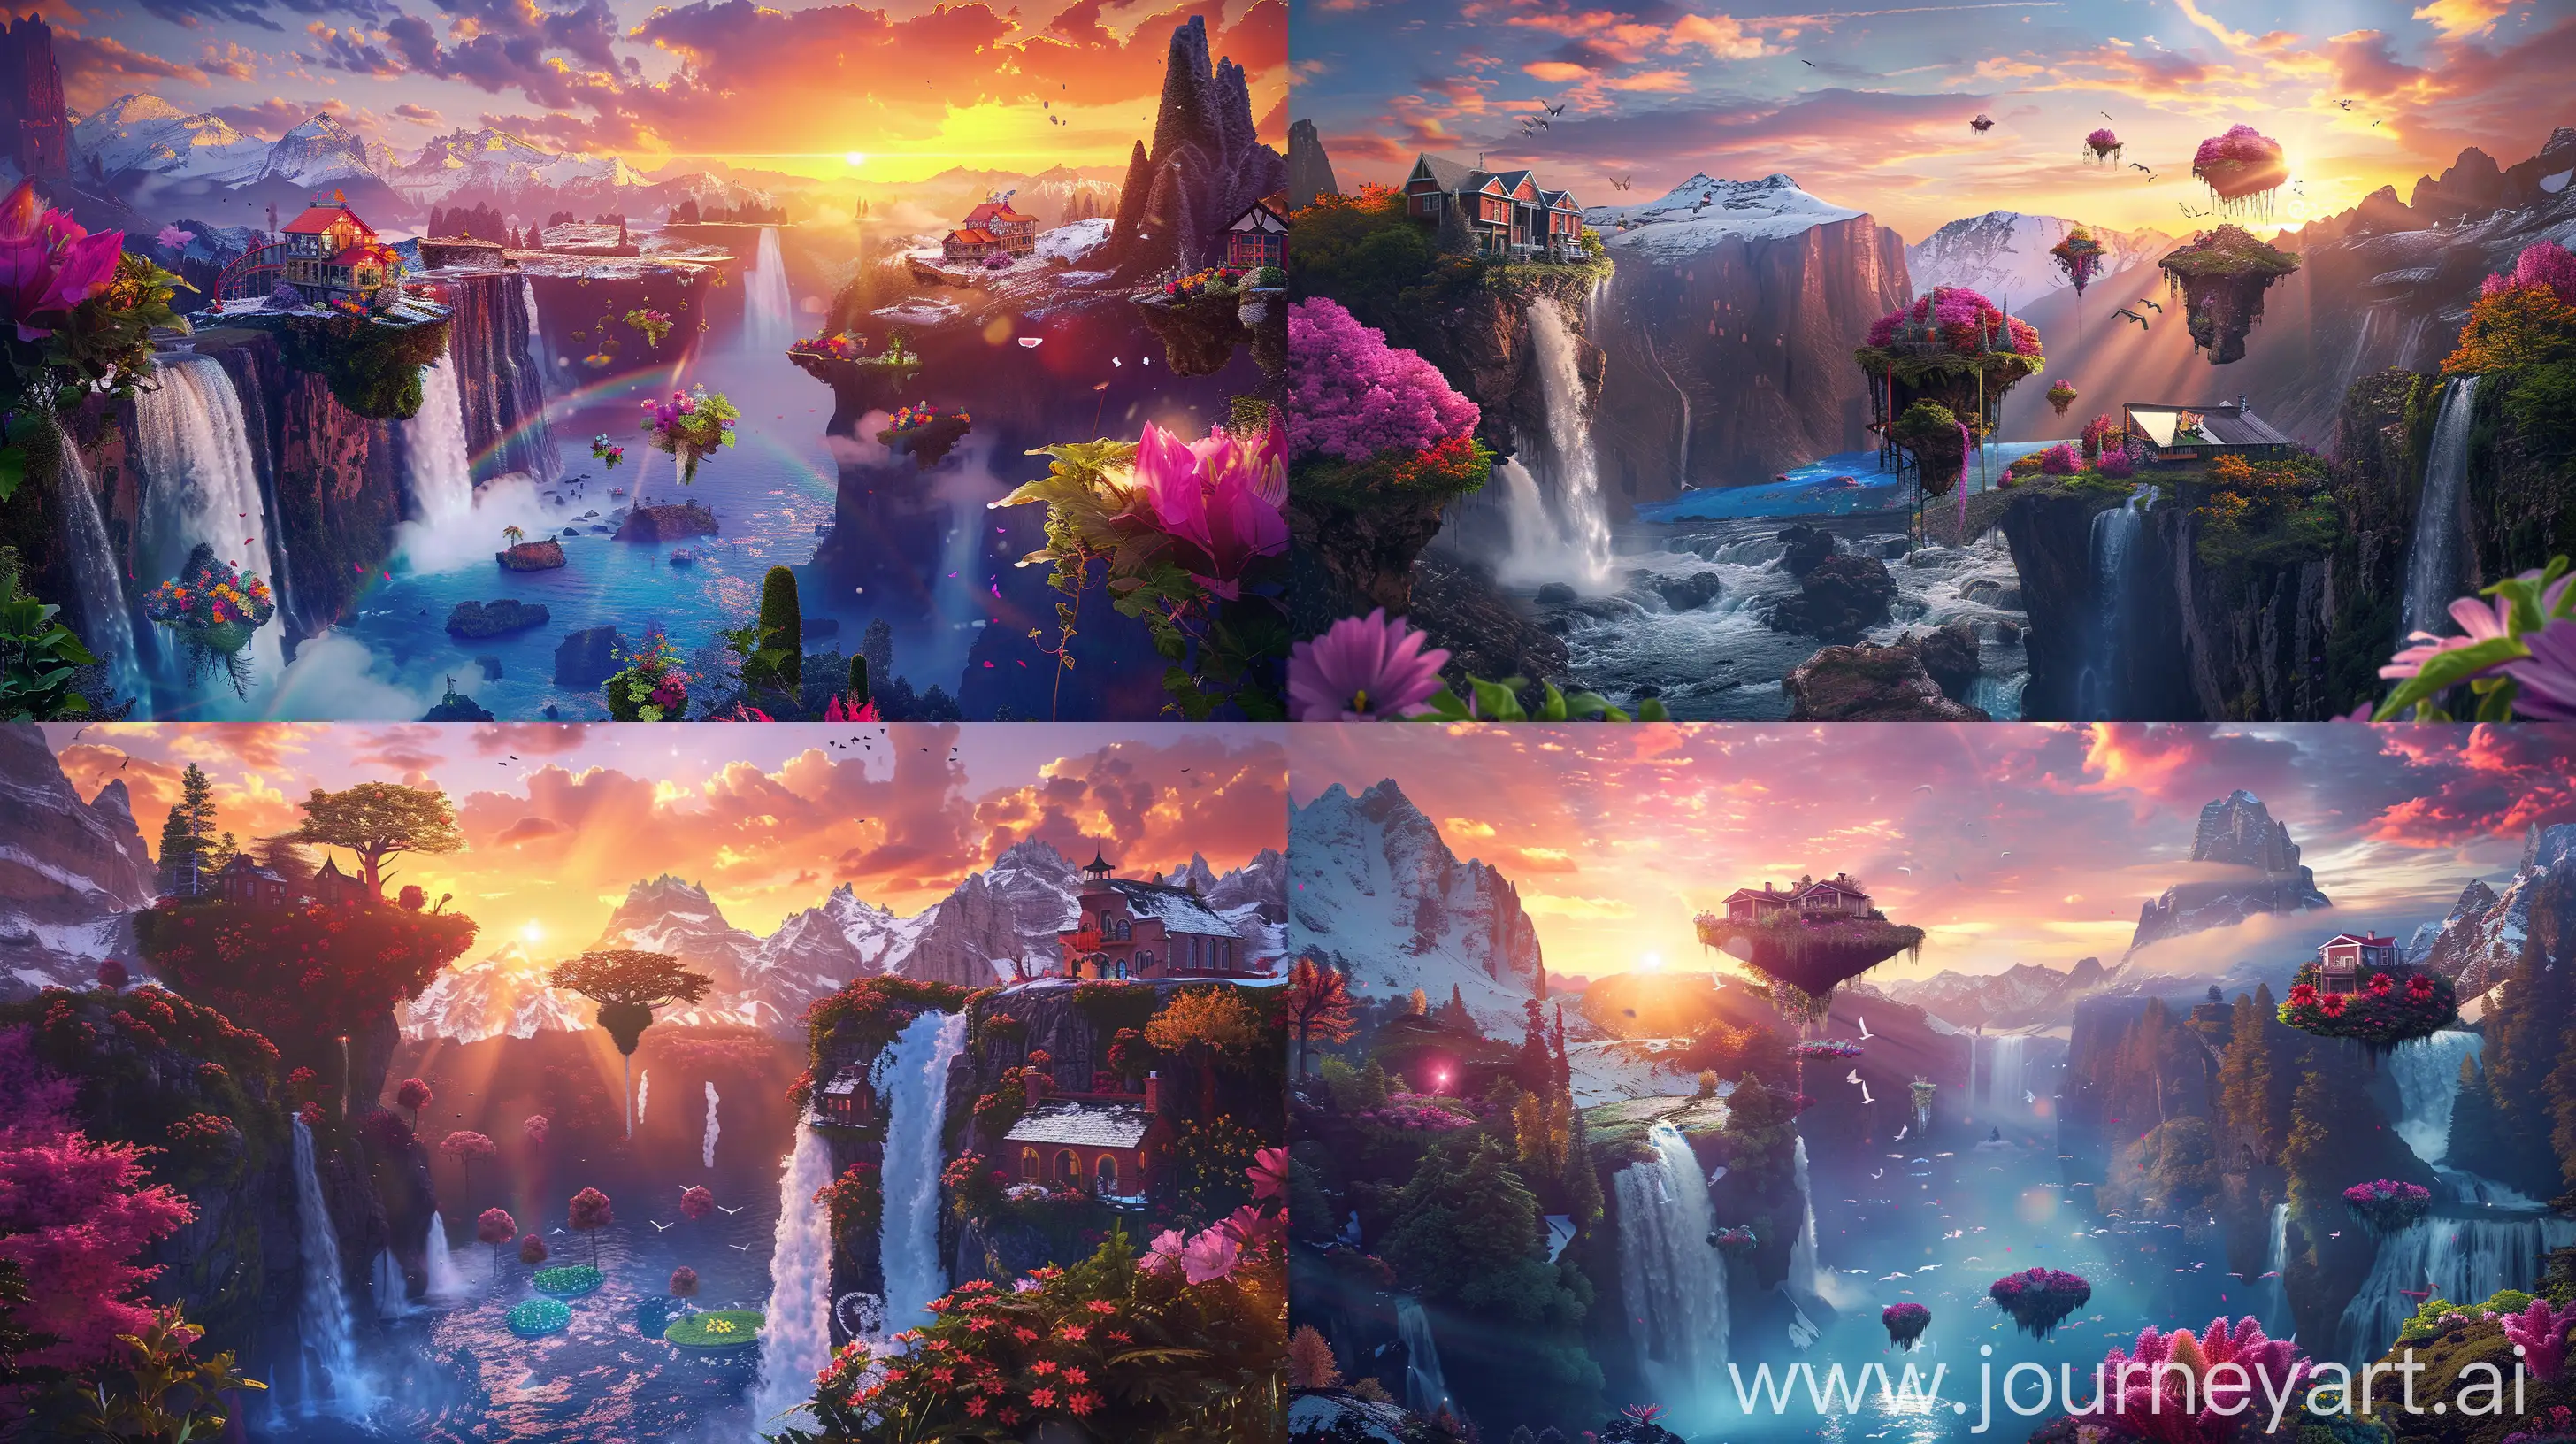 Vibrant-Fantasy-Landscape-with-Waterfalls-Floating-Islands-and-TreeHouse-Dwellings